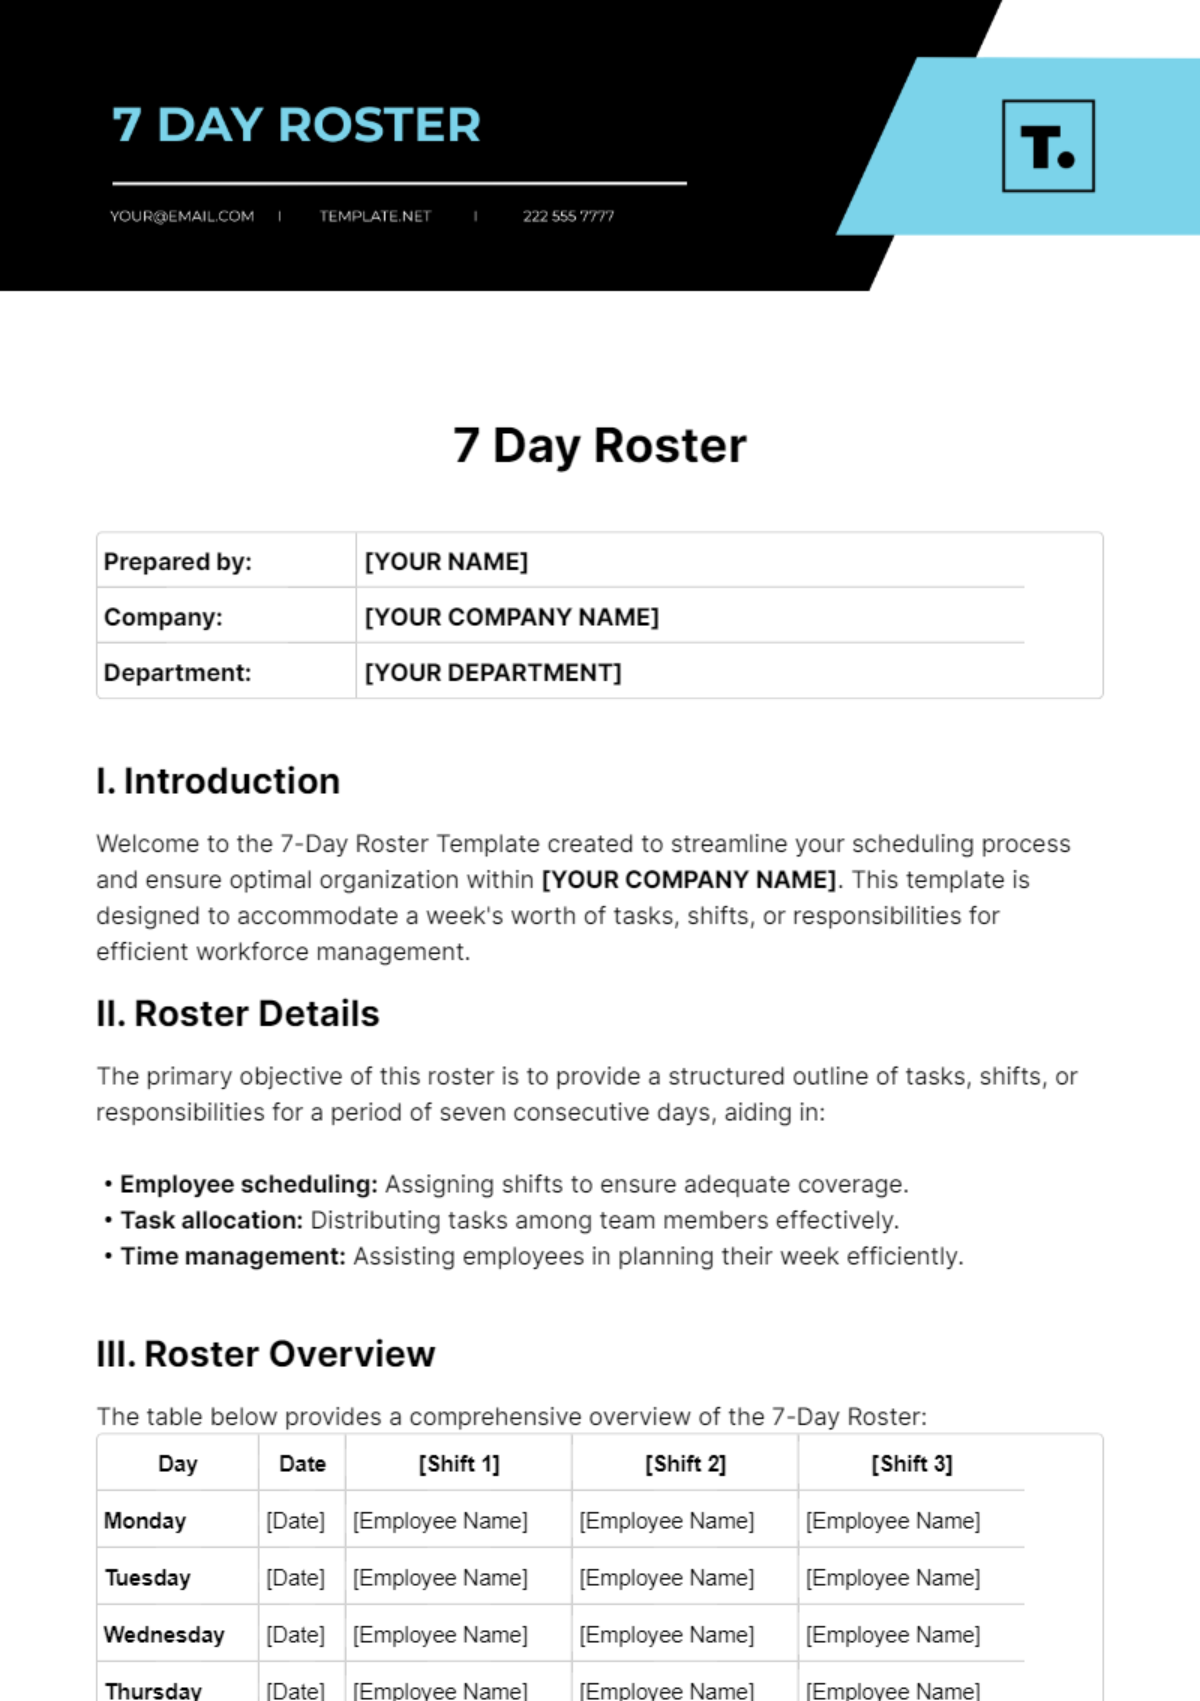 7 Day Roster Template